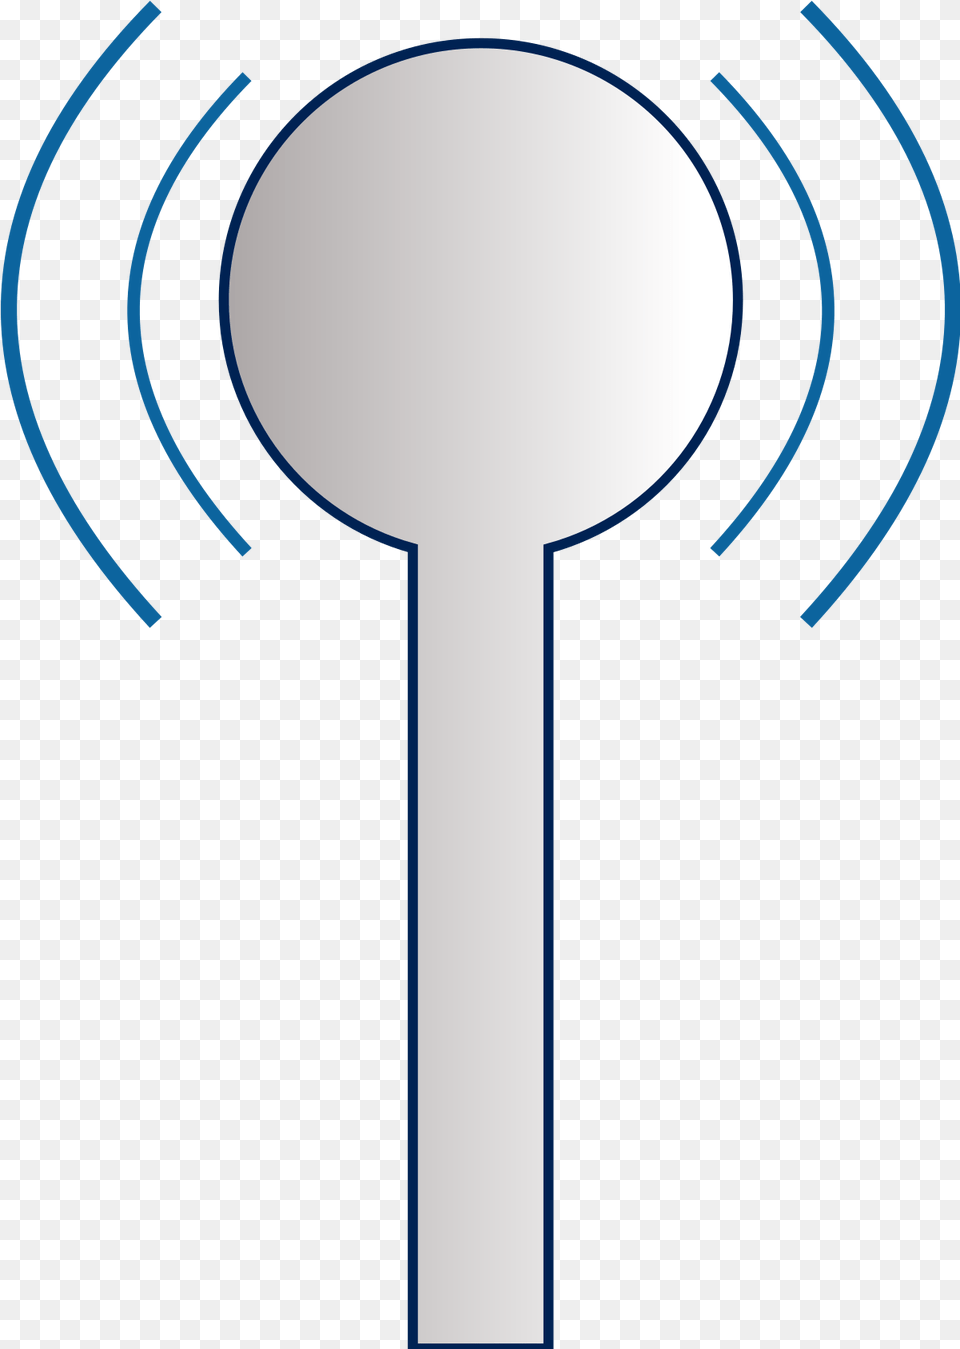 Filewireless Icon Blue Linessvg Wikimedia Commons Clip Art, Cutlery, Spoon, Fork, Cross Png Image